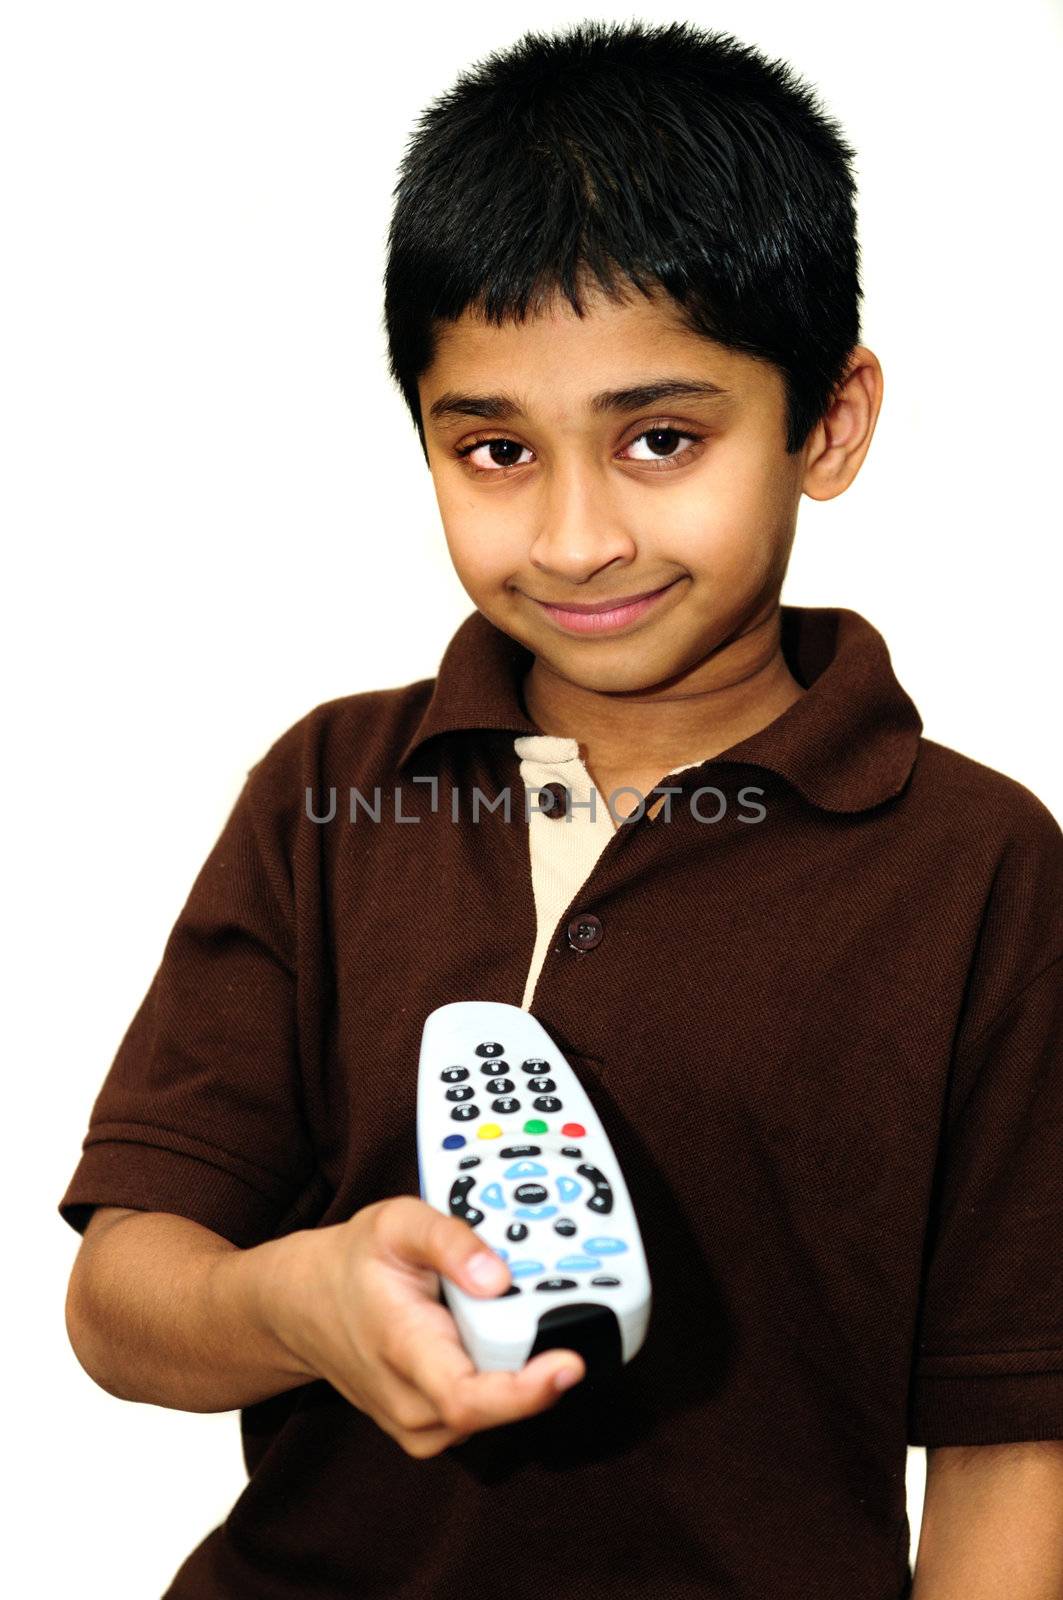 An handsome Indian kid holding a remote control